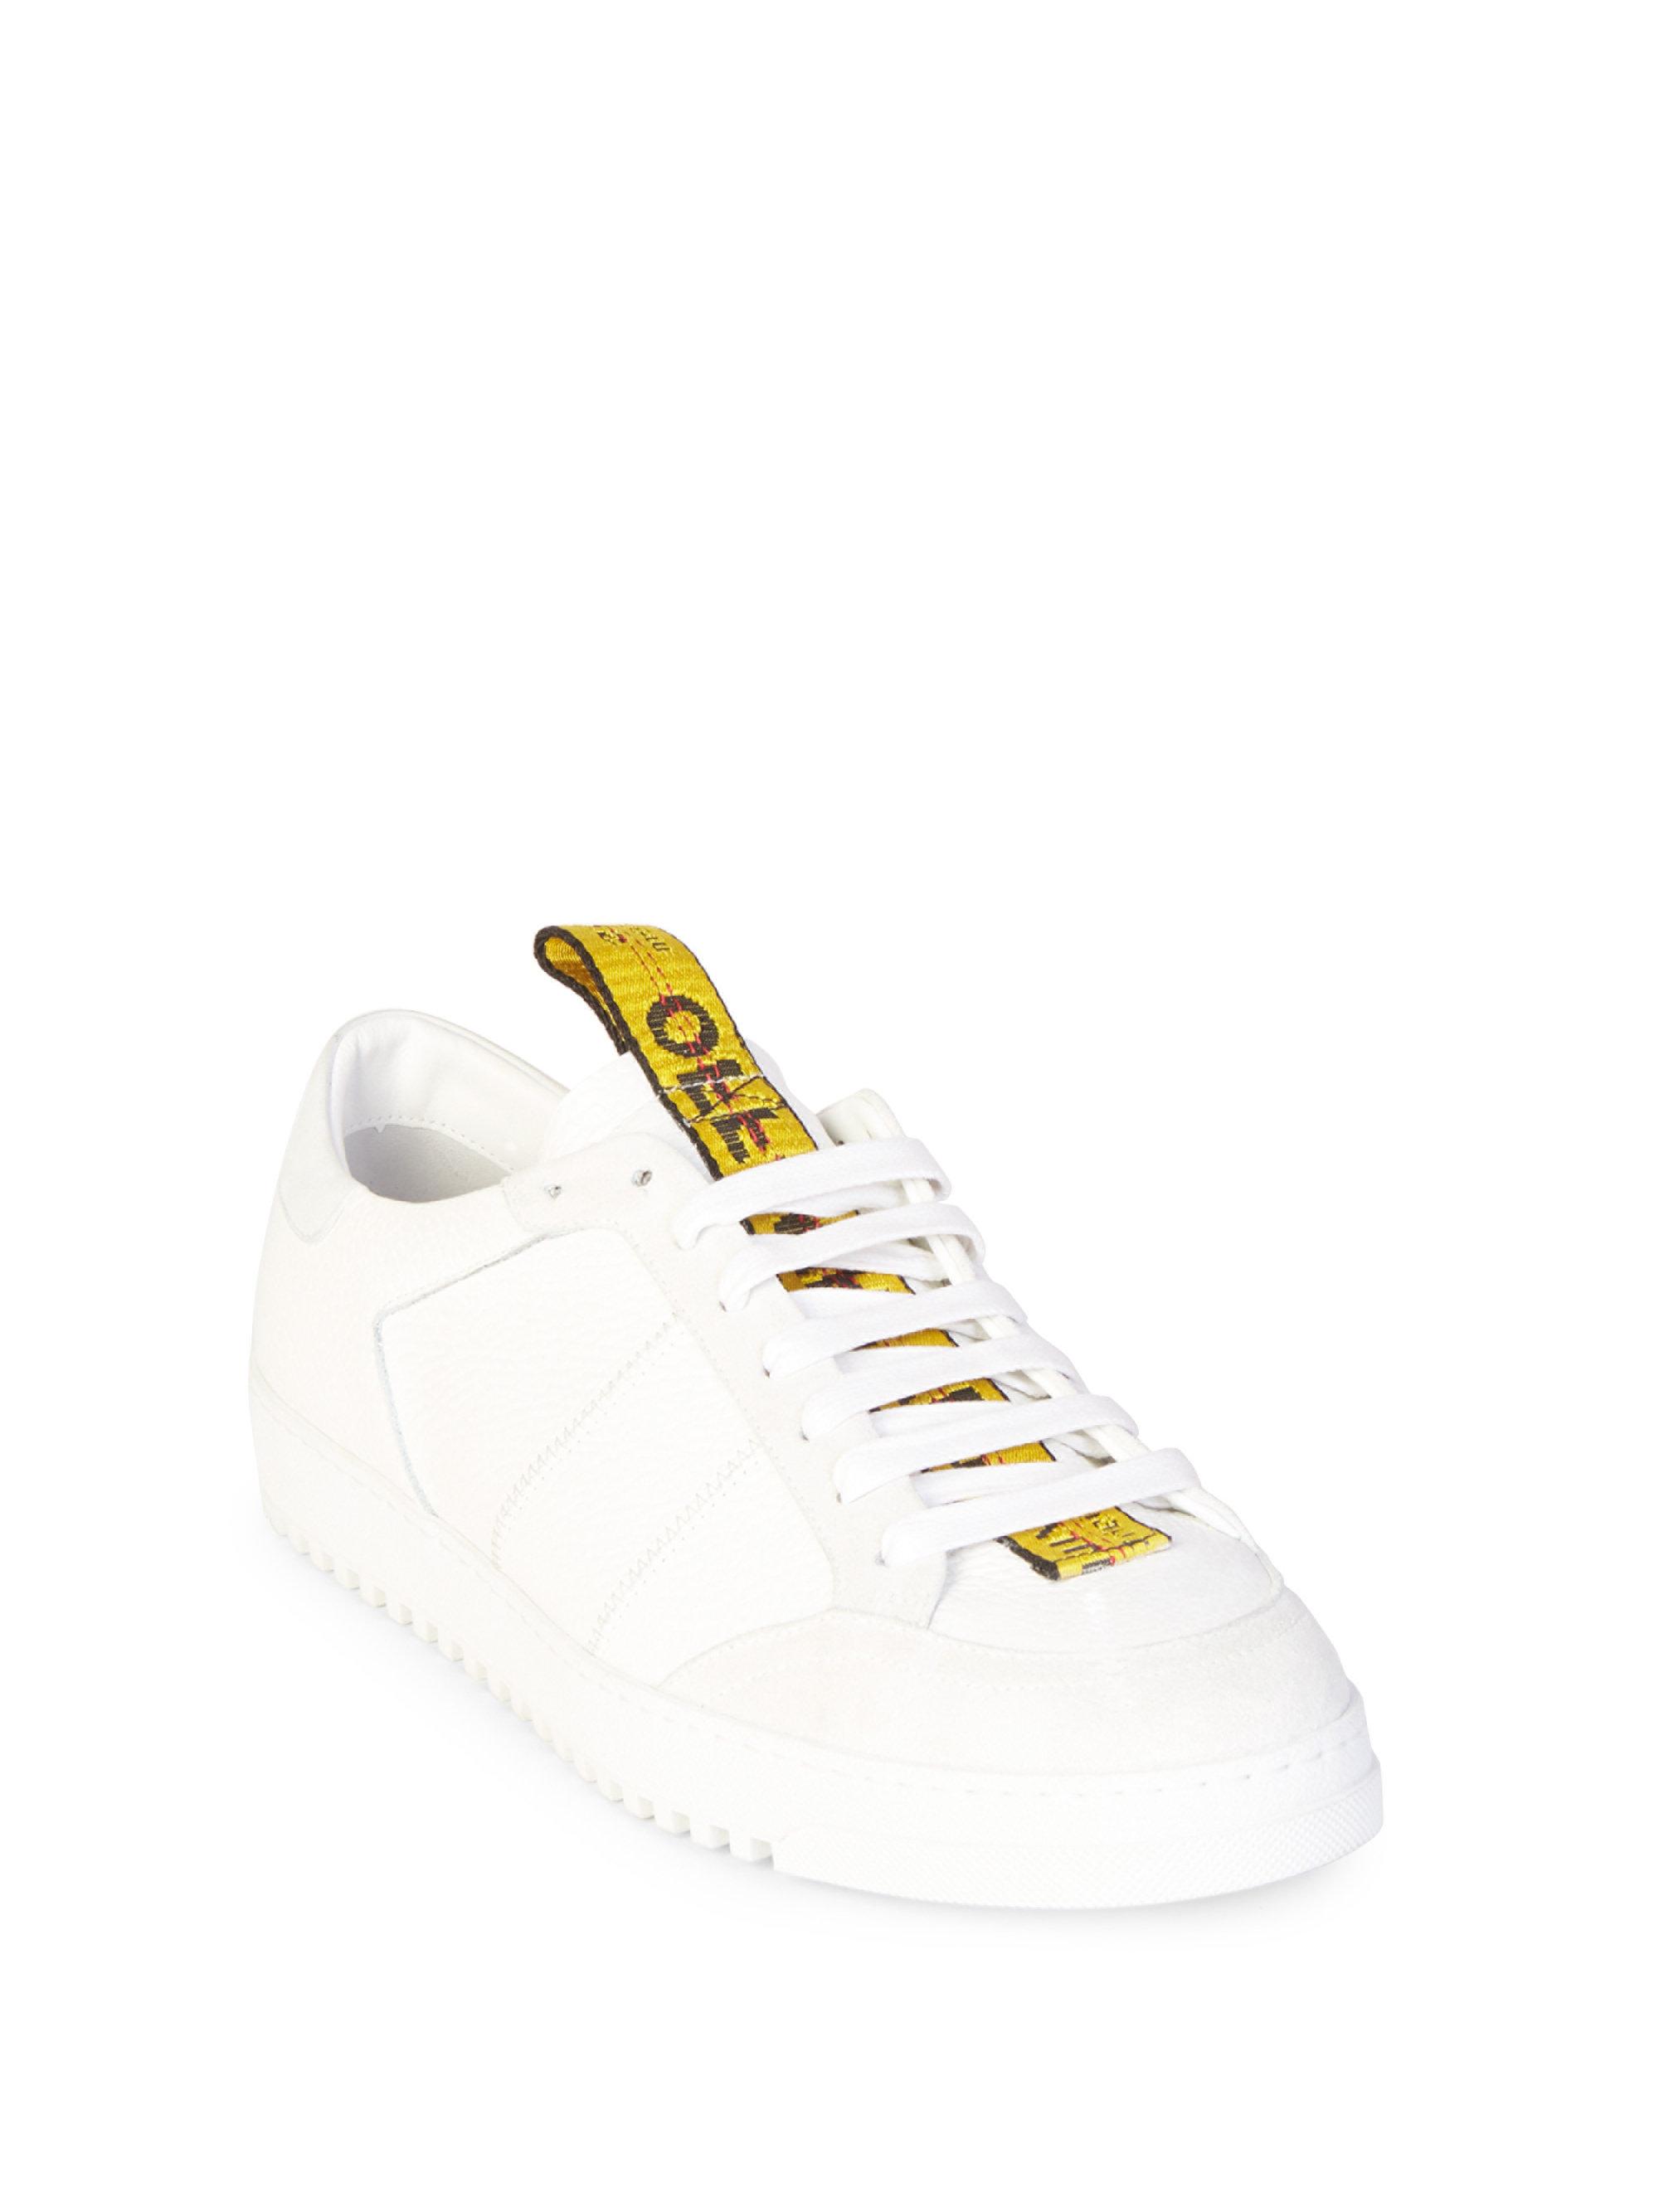 off white shoes belt > Up to 77% OFF > Free shipping